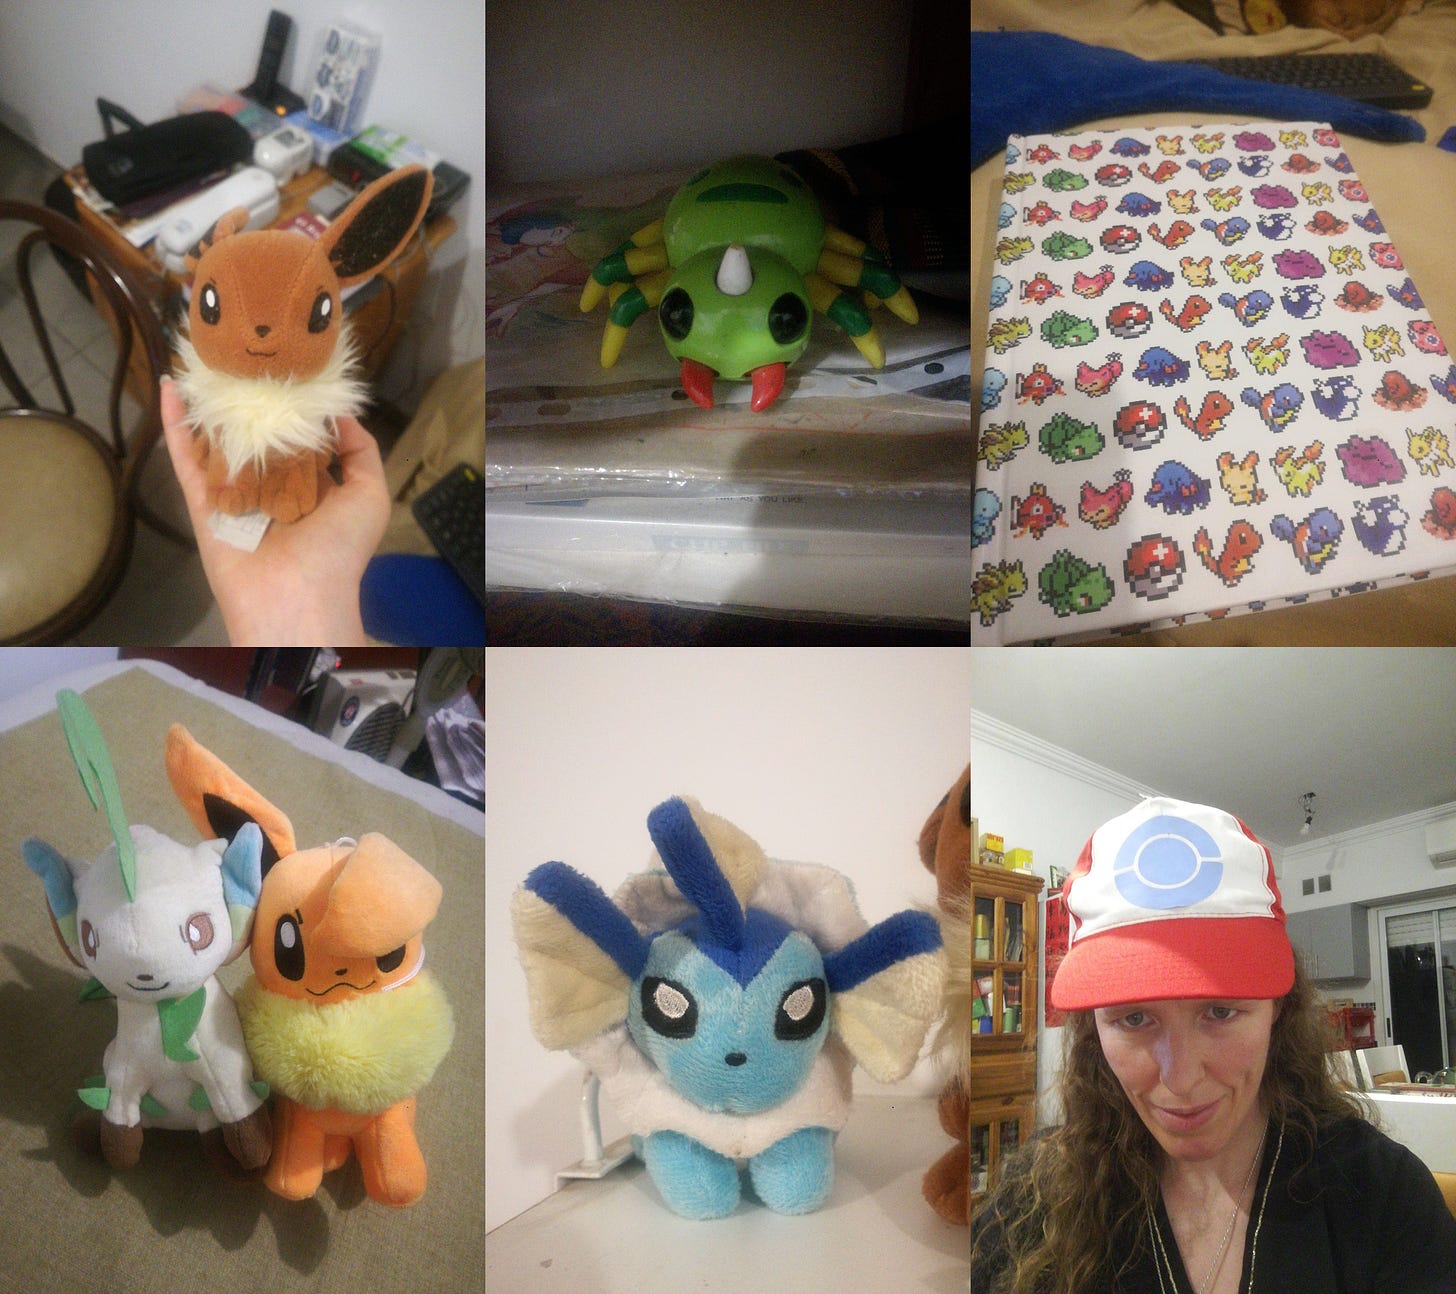 A selection of Pokémon plush toys and a sketchbook from Lady Vulpix's collection